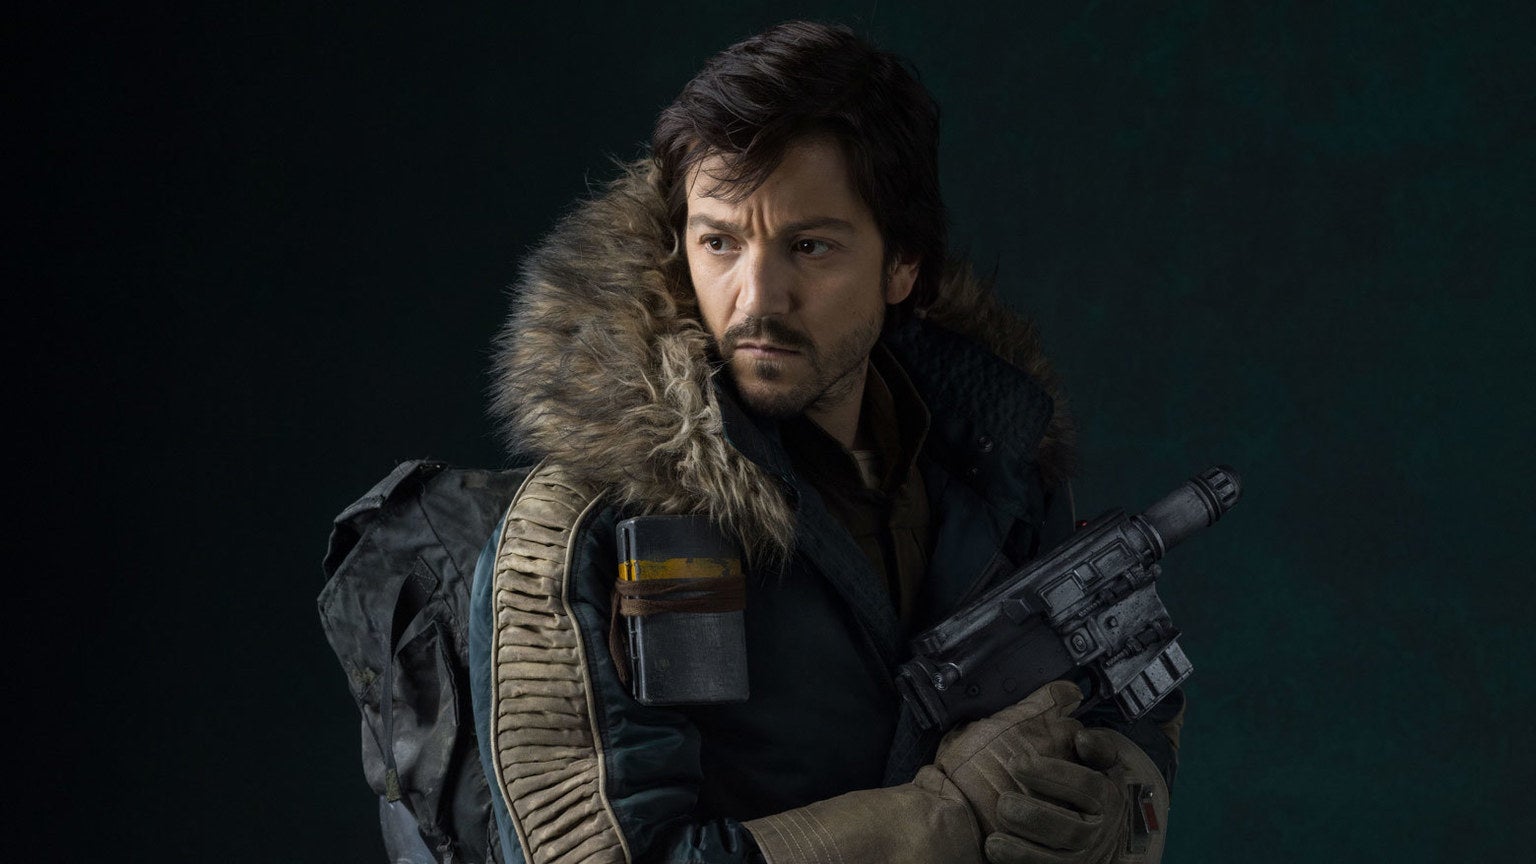 Time for your moment, Cassian. (Image: Lucasfilm)